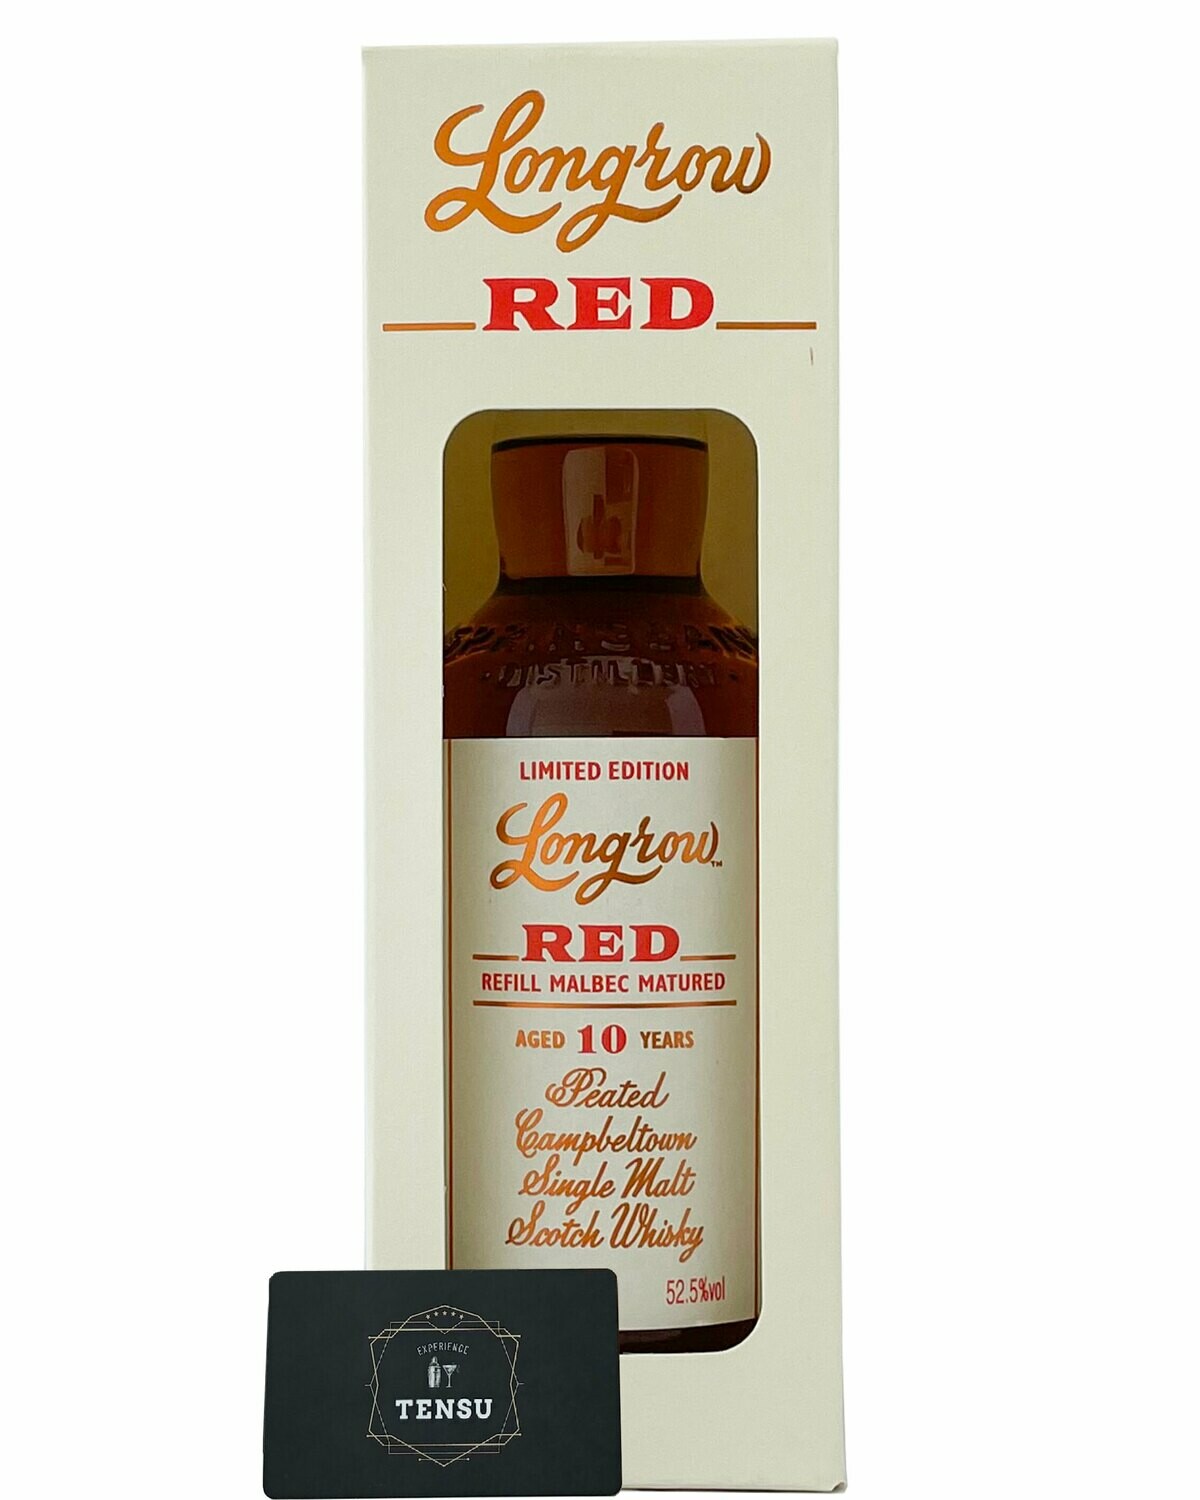 Longrow RED 10 Years Old (2020) 52.5 OB